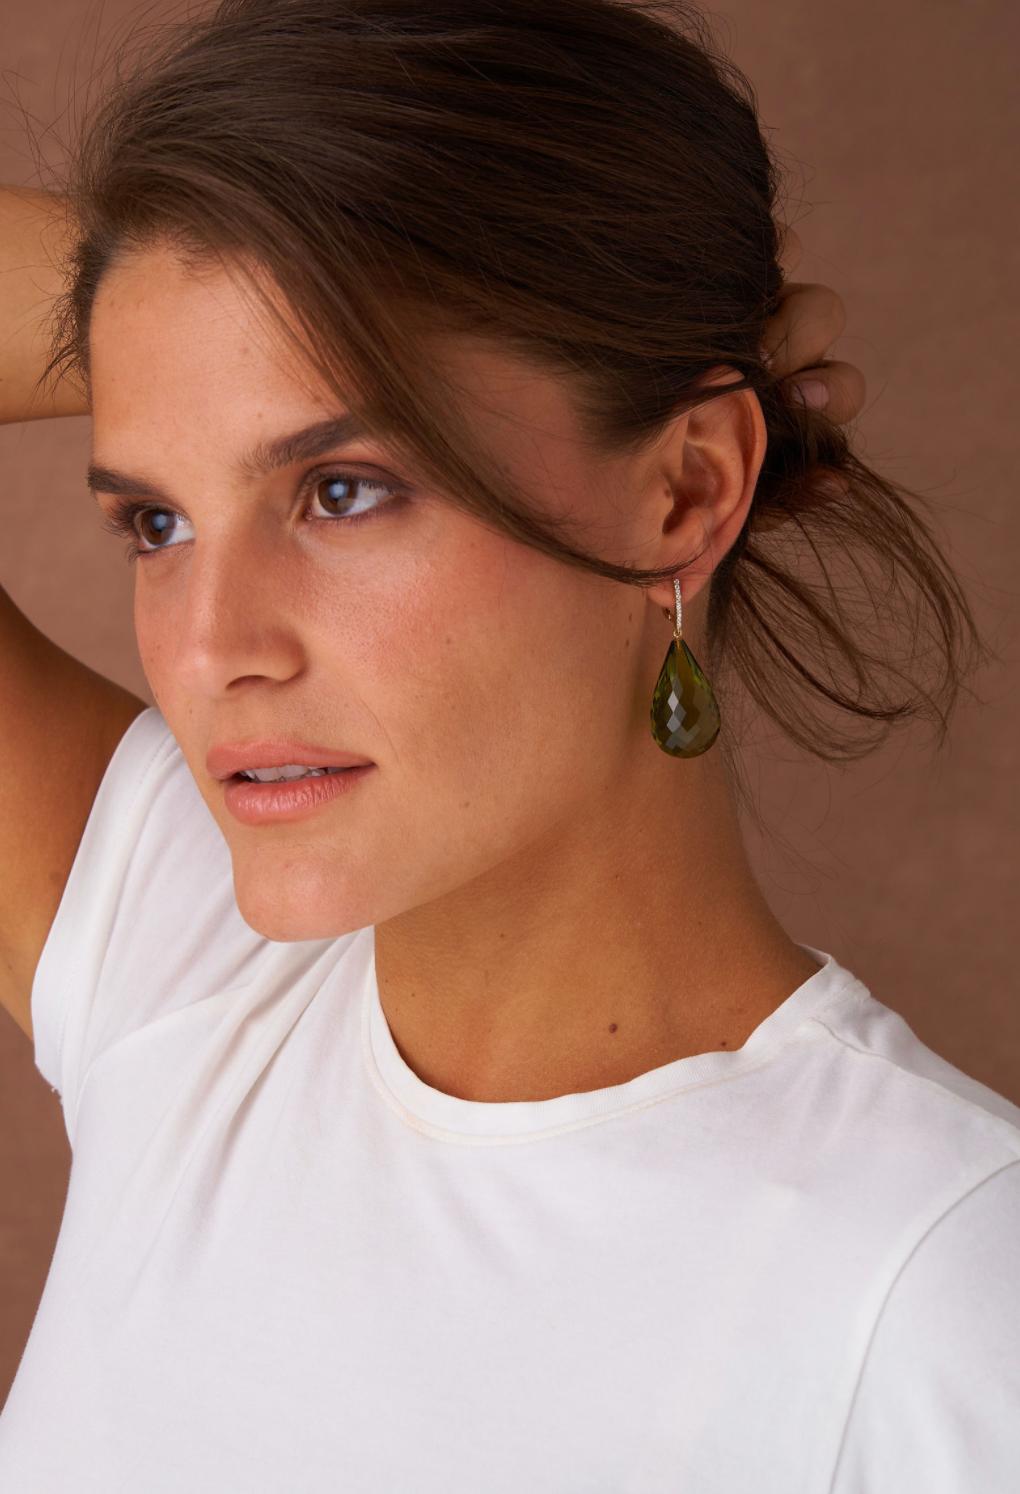 These earrings feature stunning briolette-cut green amber drops that dangle elegantly from a delicate diamond set top. The warm tone of the amber is beautifully offset by the sparkling diamonds, adding a touch of glamour to the organic design.  The